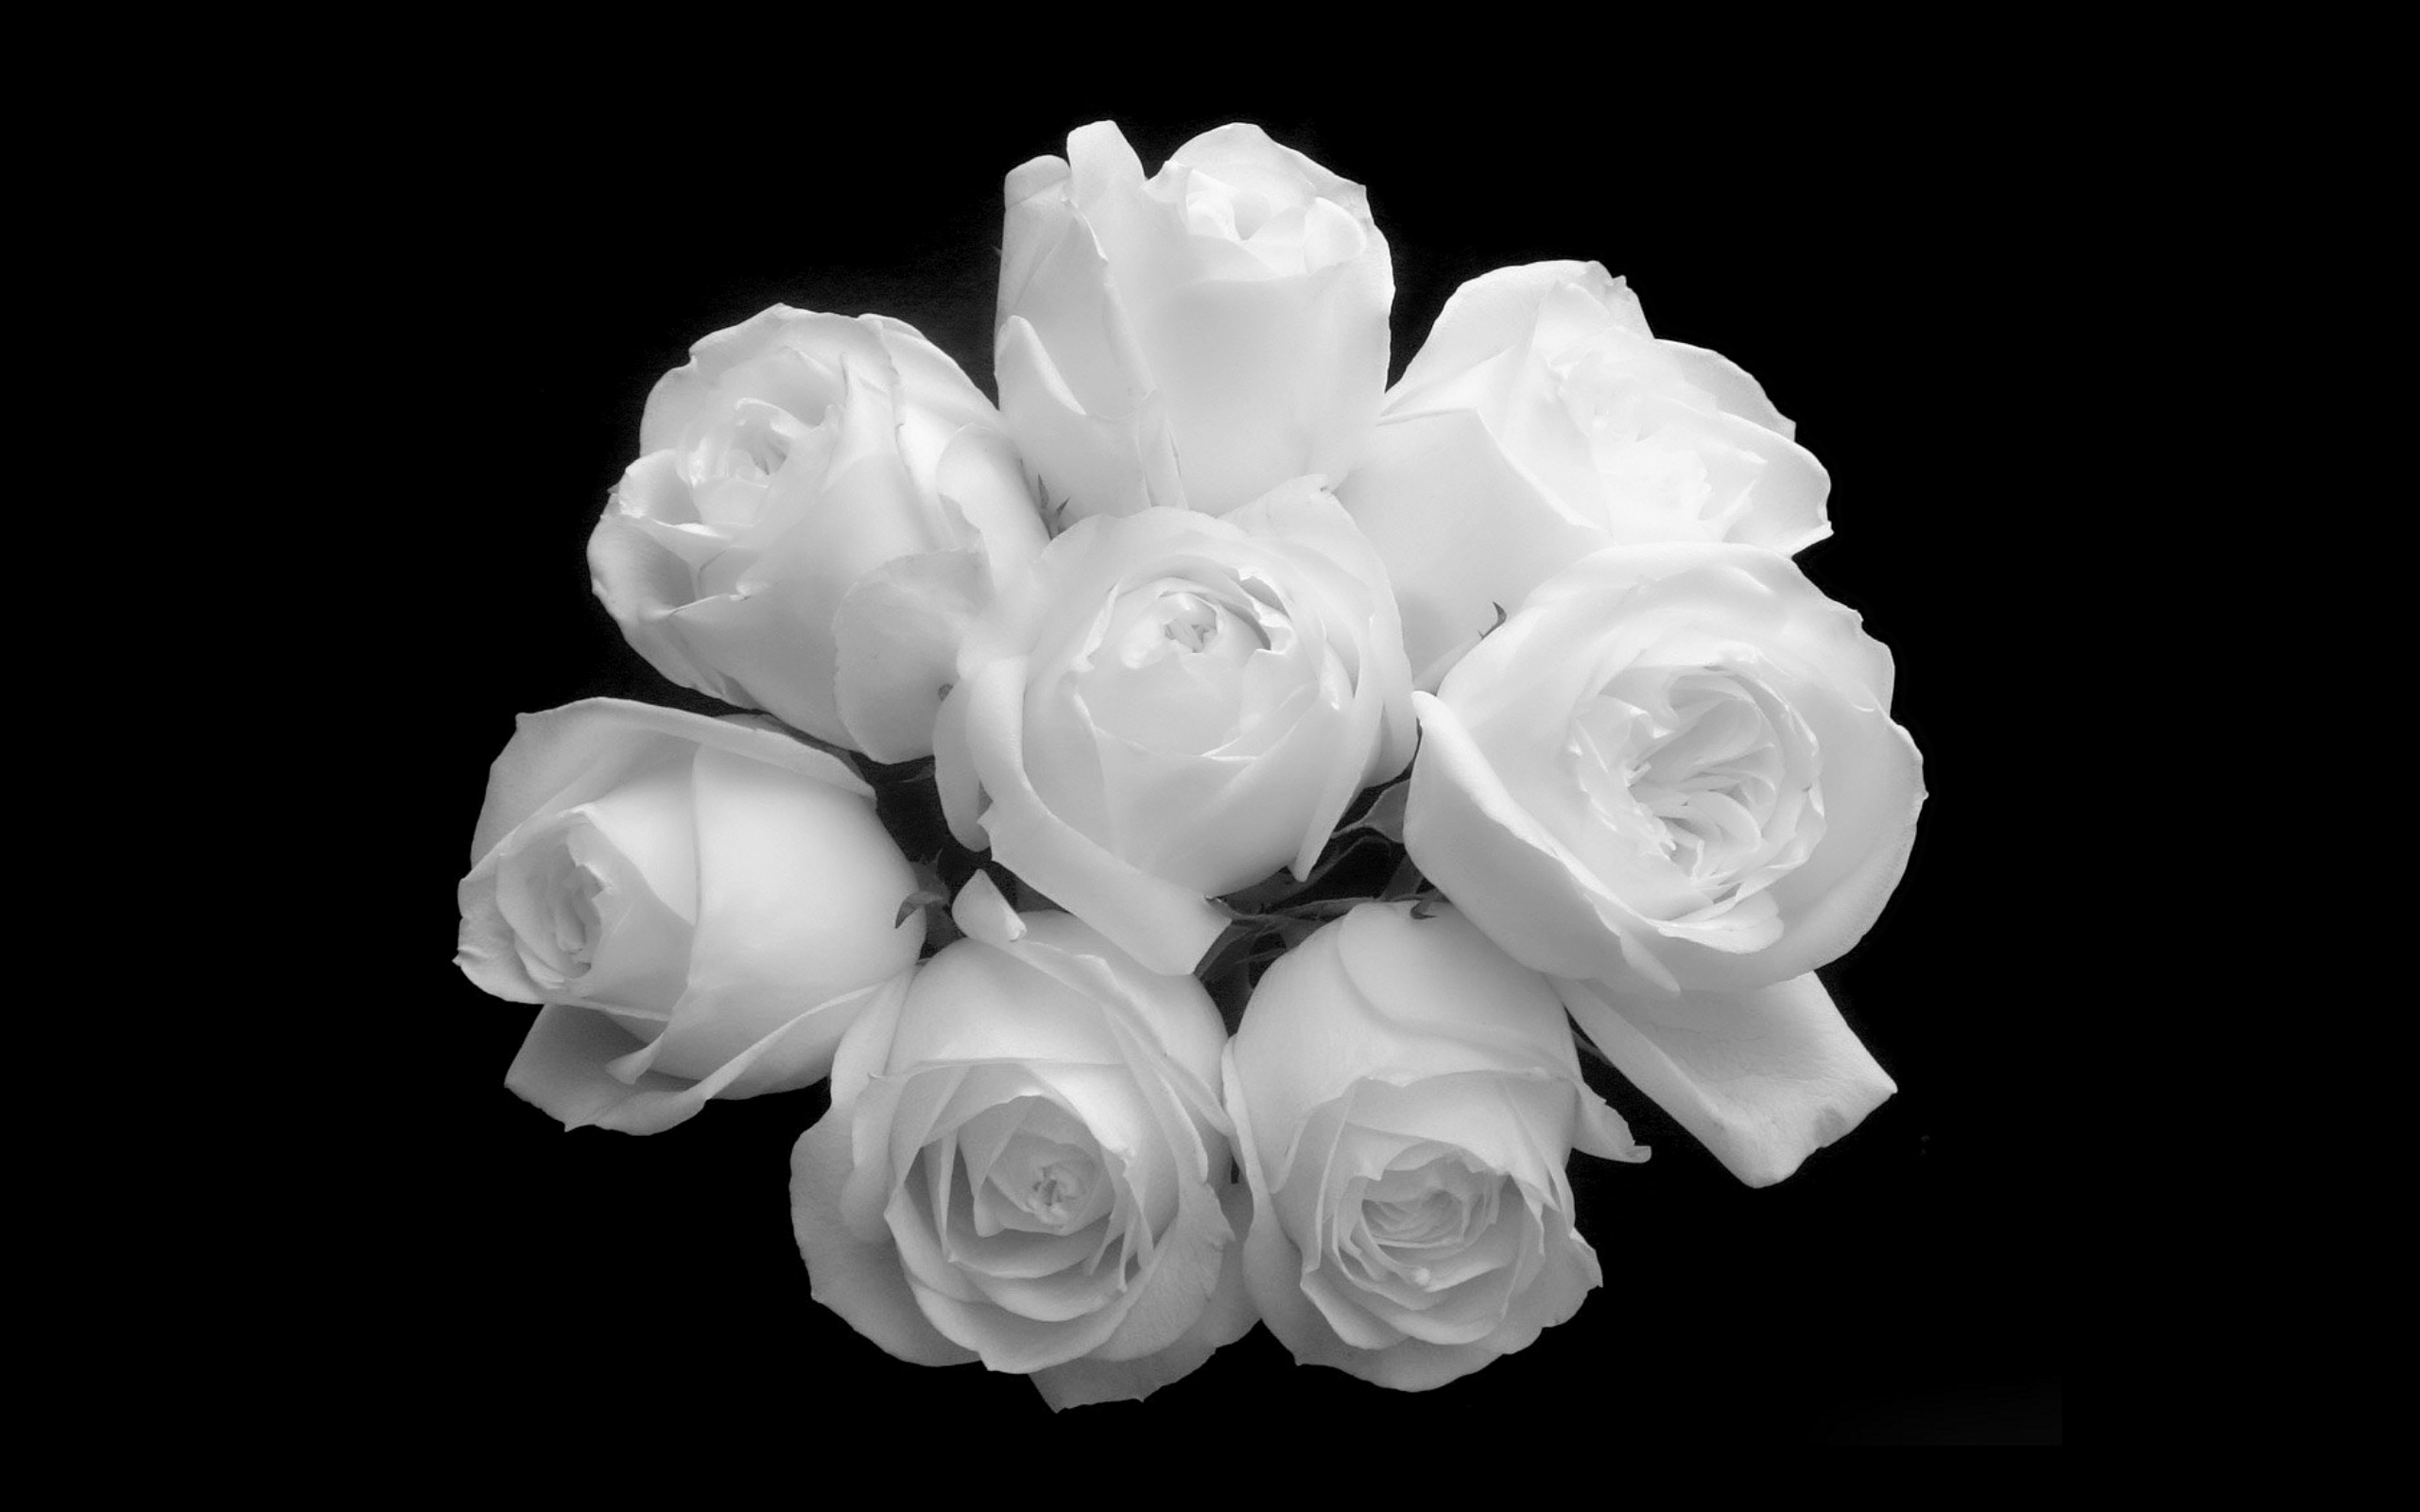 White Roses Background Wallpaper High Definition Quality